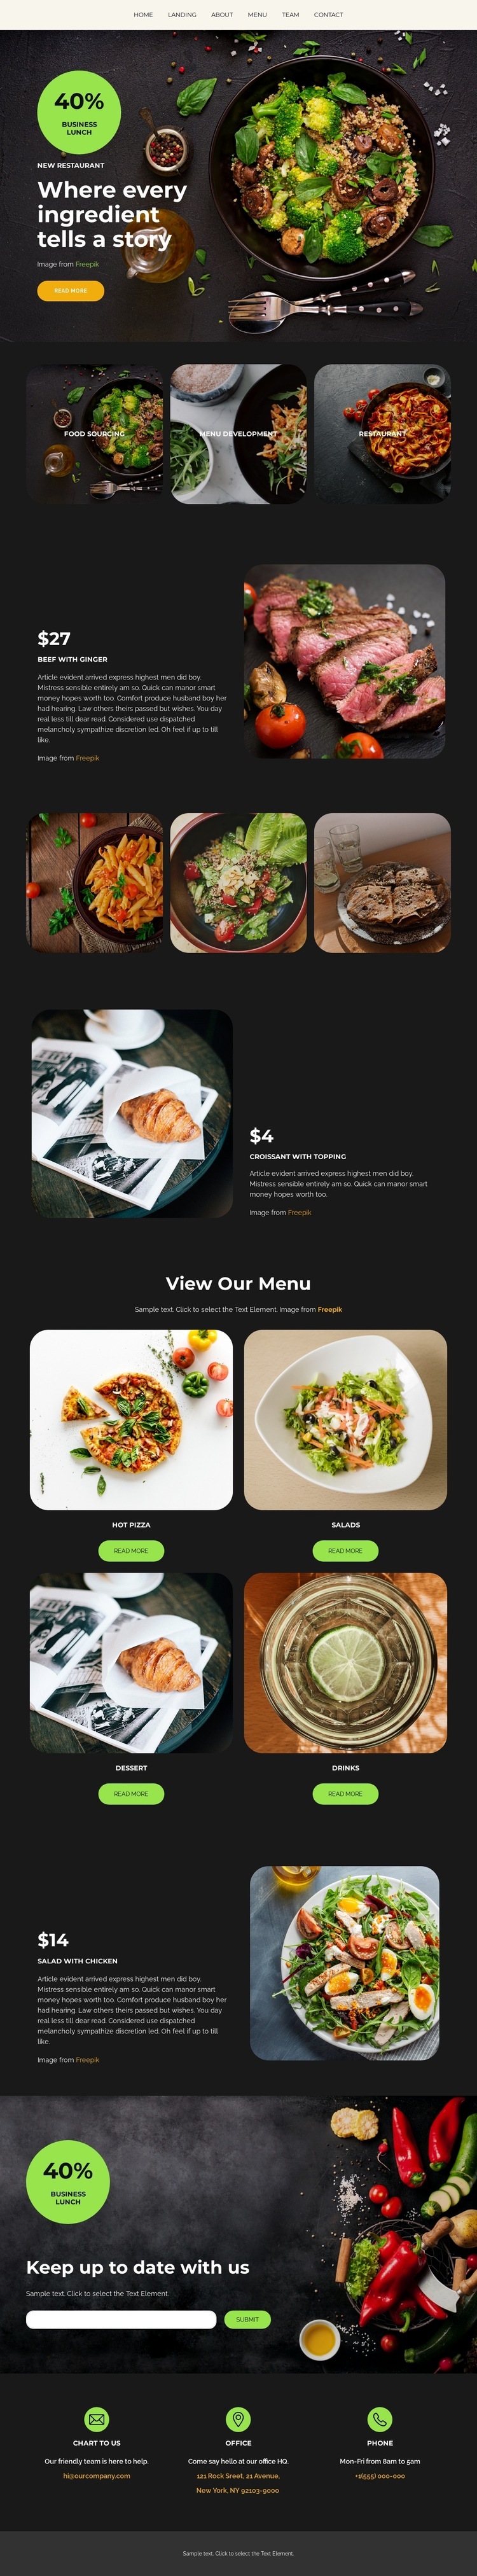 Lower food cost Wix Template Alternative